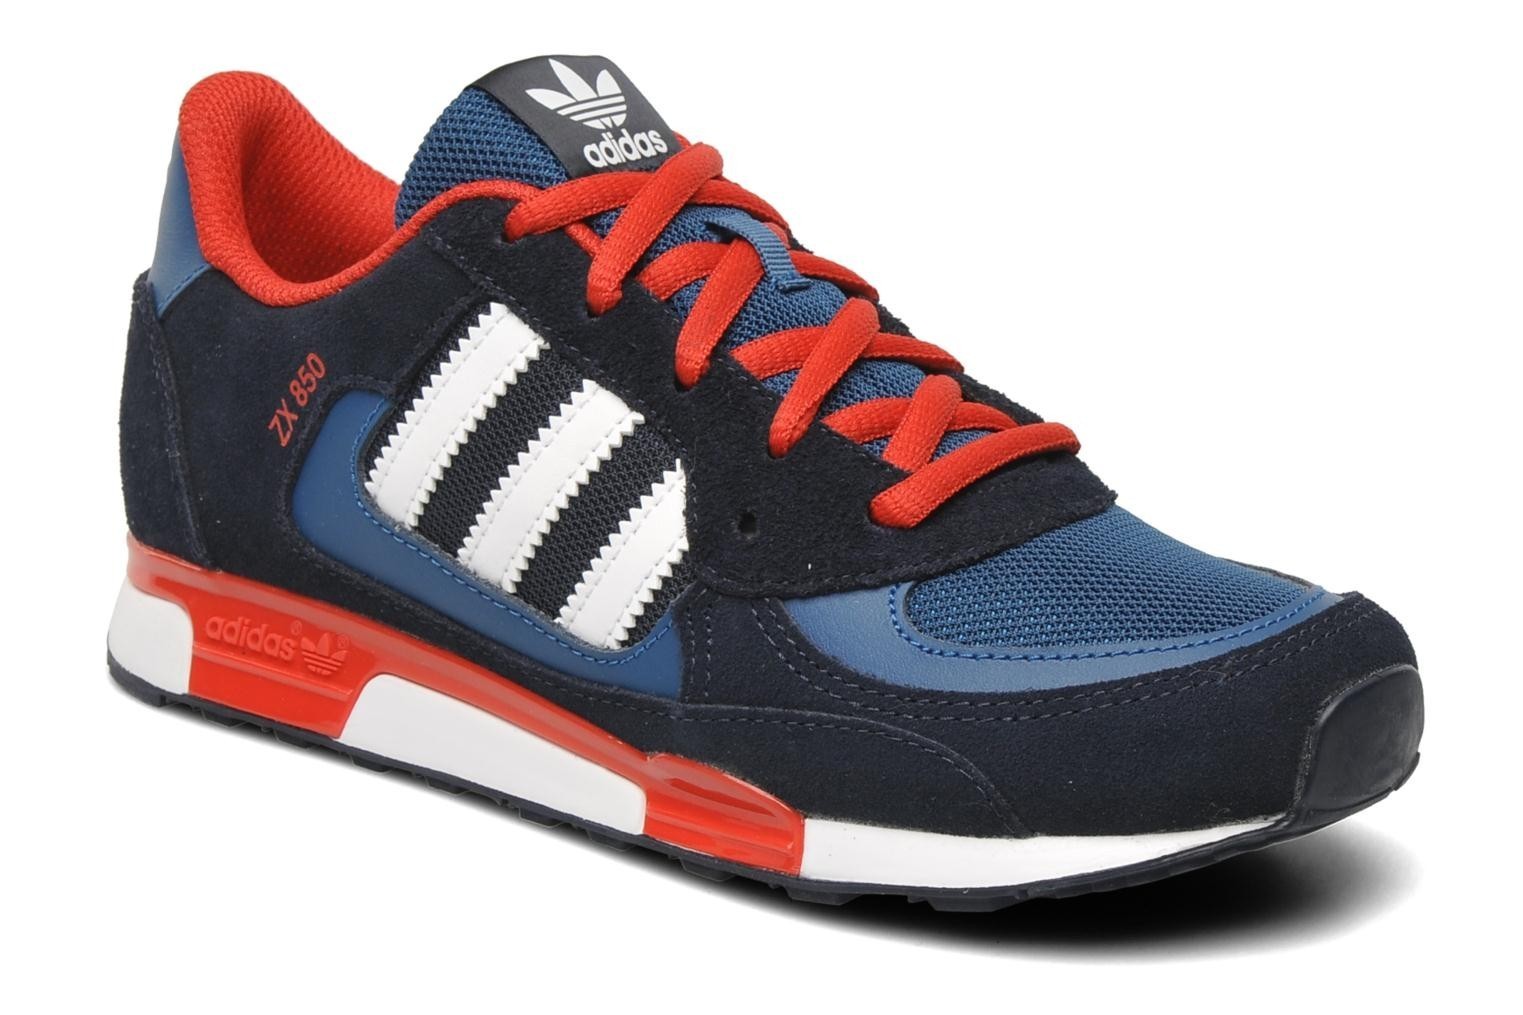 Adidas Zx 850 homme pas cher